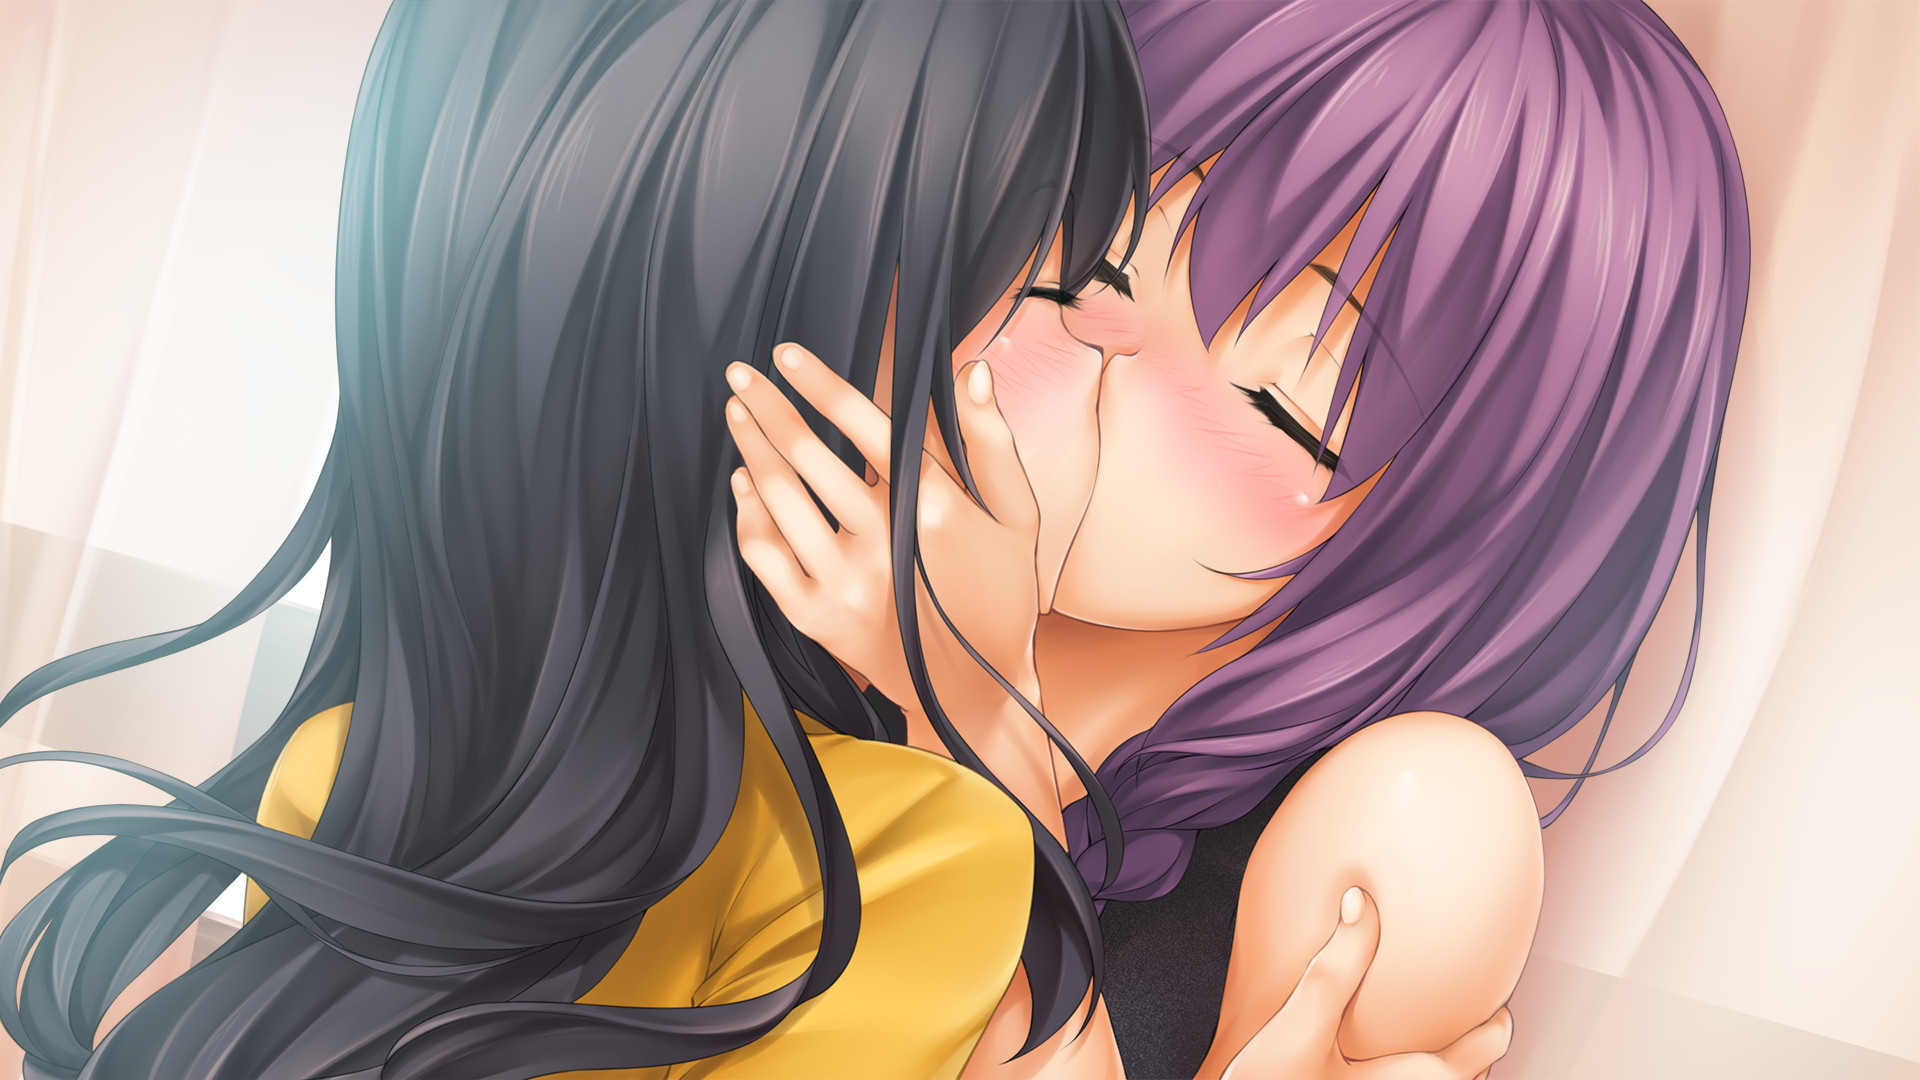 Negligee Visual Novel Porn - Download Free Hentai Game Porn Games Negligee: Love Stories